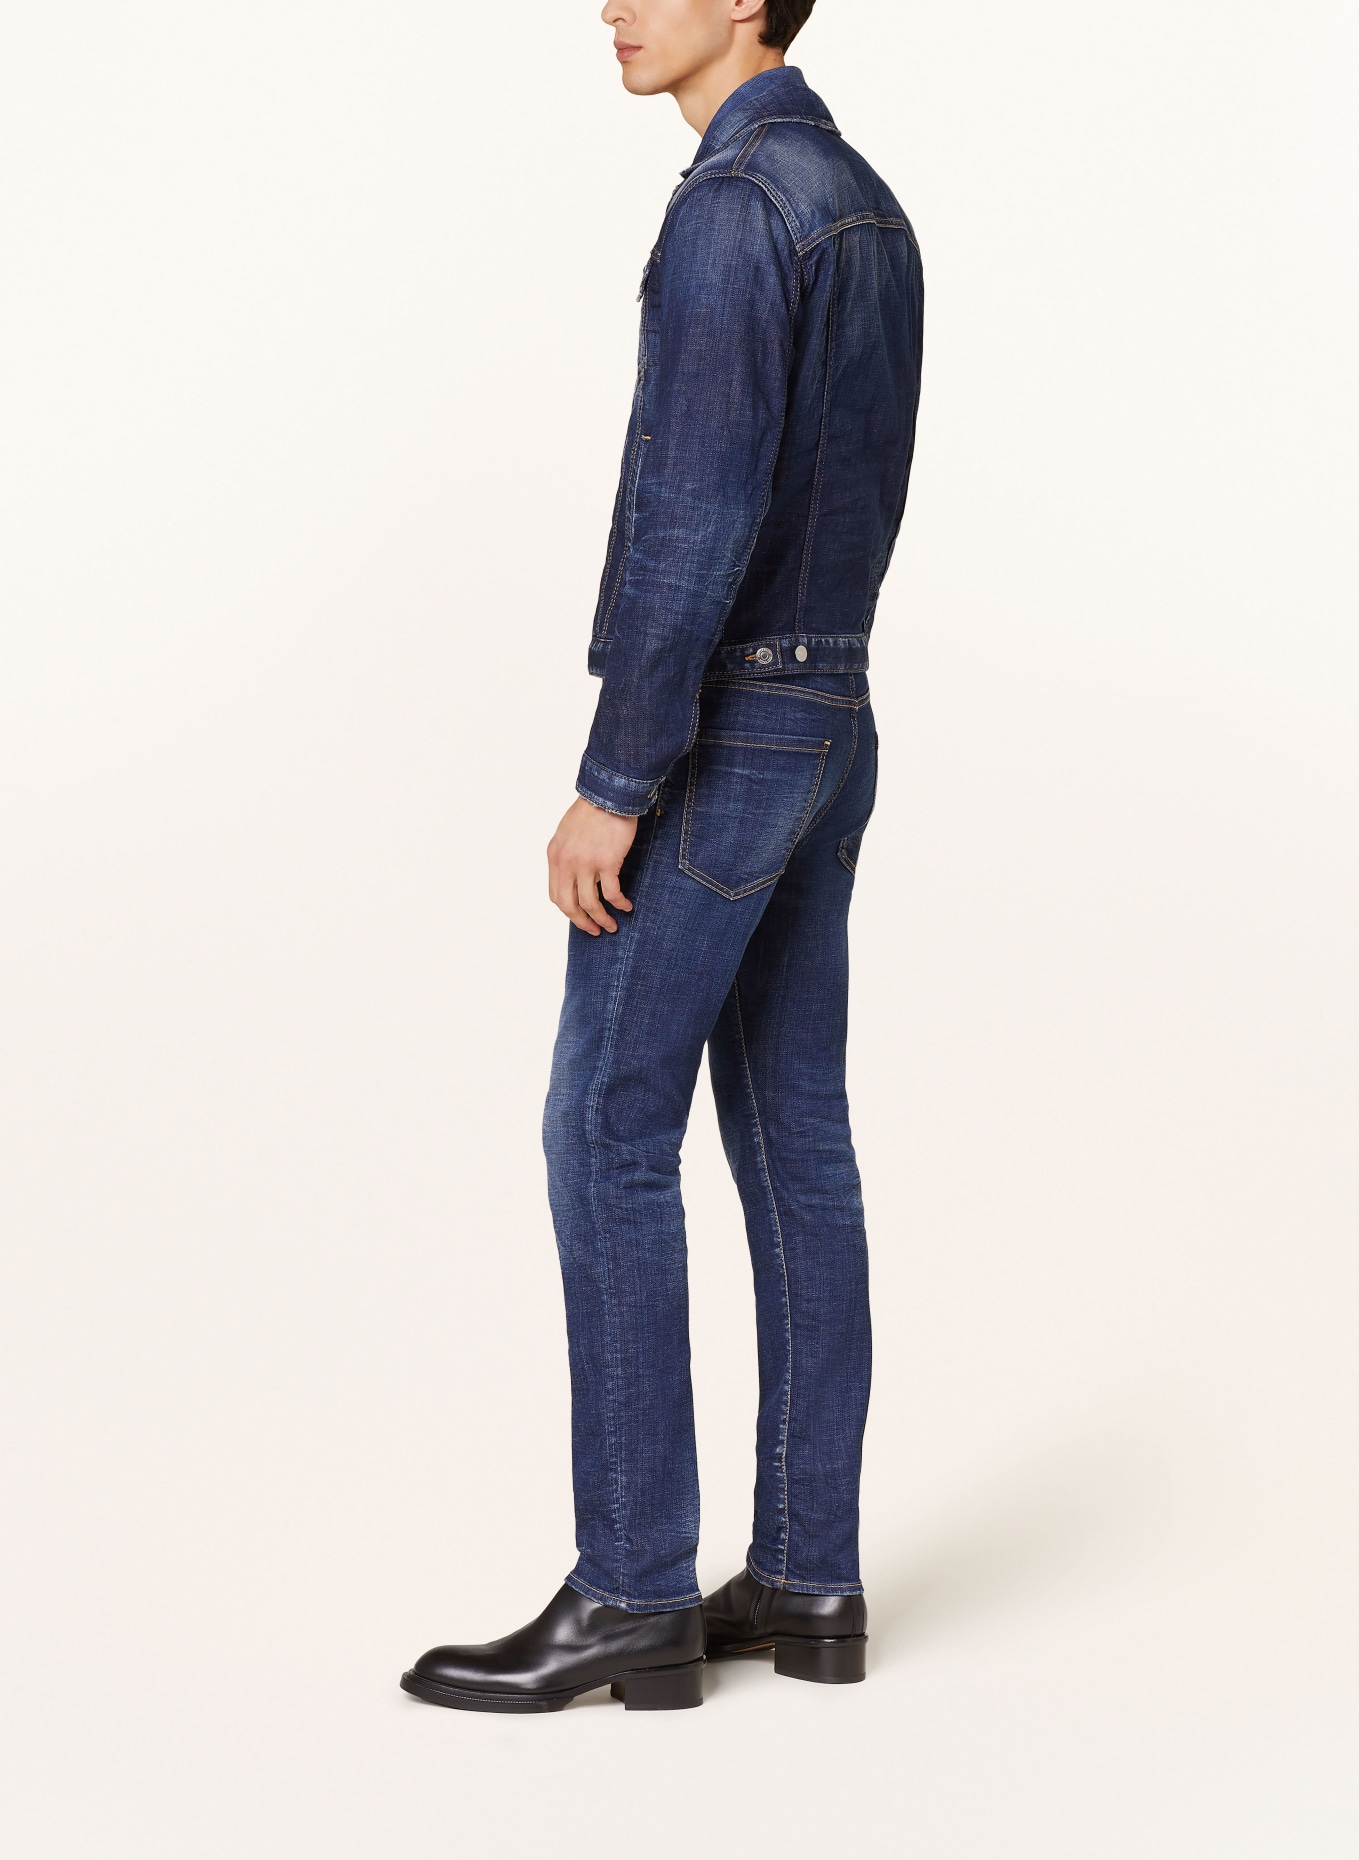 DSQUARED2 Jeans COOL GUY Extra Slim Fit, Farbe: 470 BLUE NAVY (Bild 4)